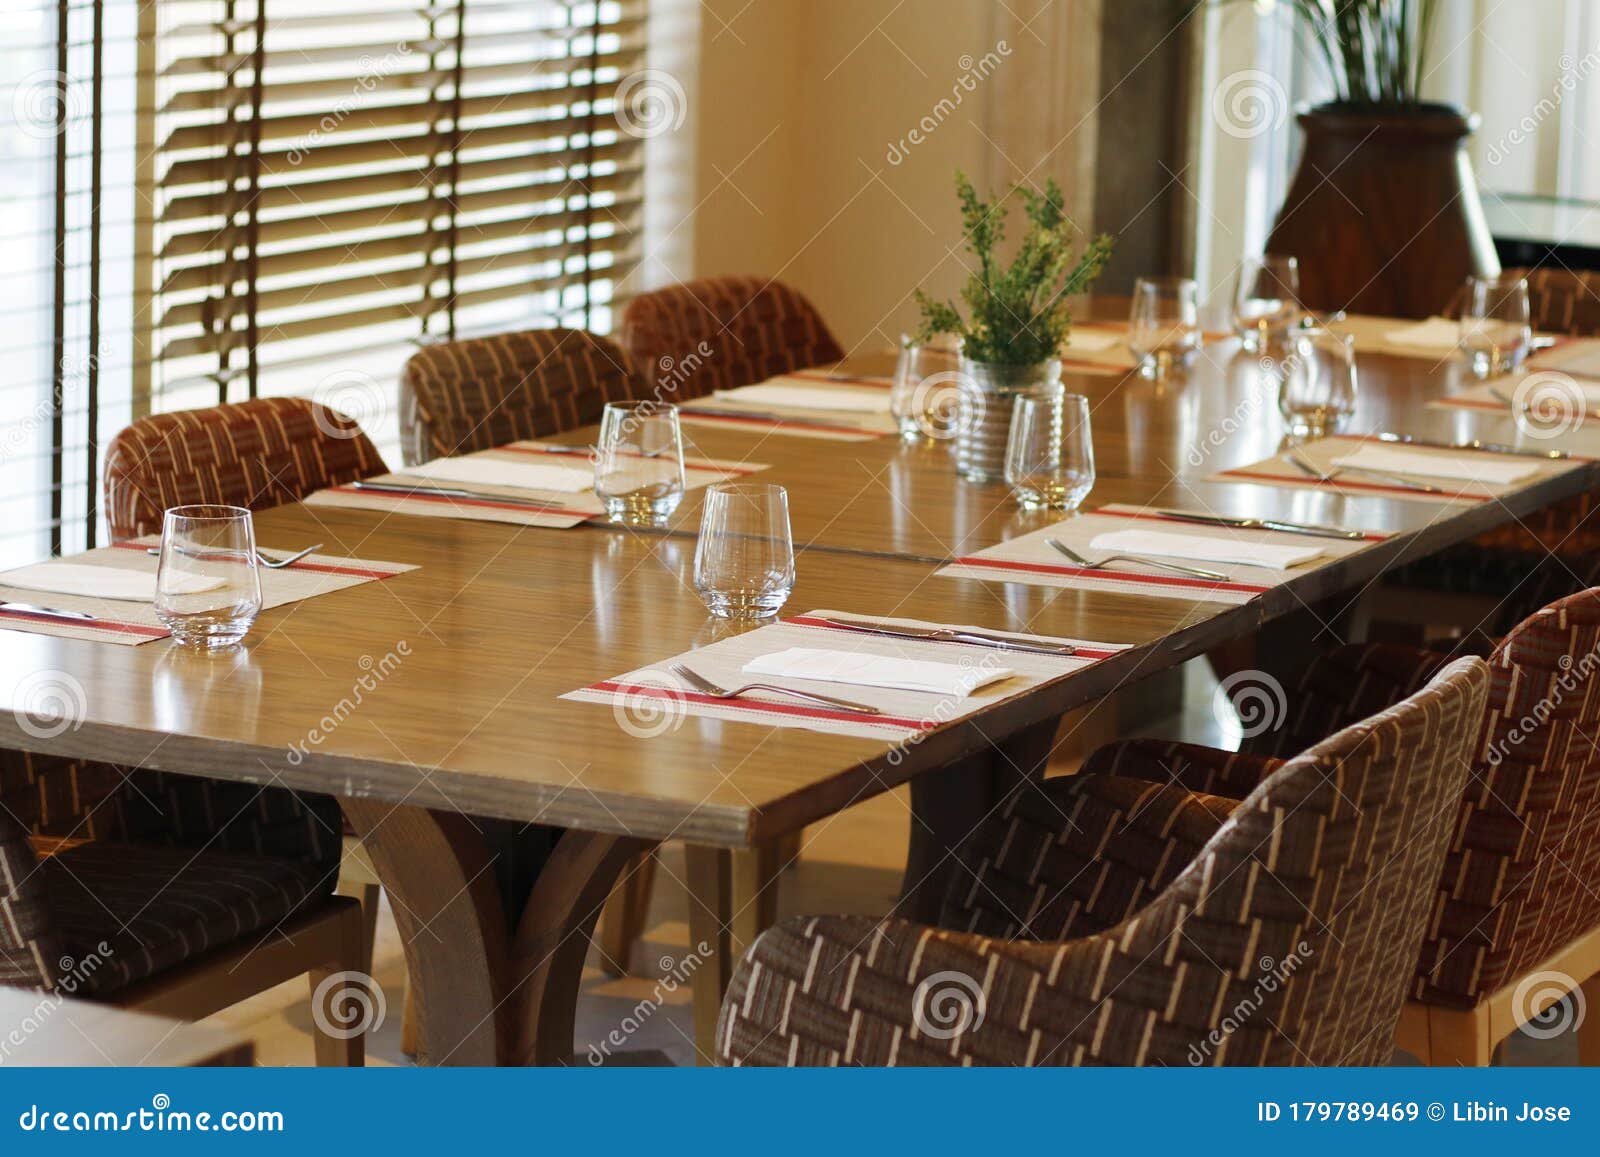 Casual Restaurant Dining Table Set Up With Dark Brown Color Theam Stock Image Image Of Design Long 179789469